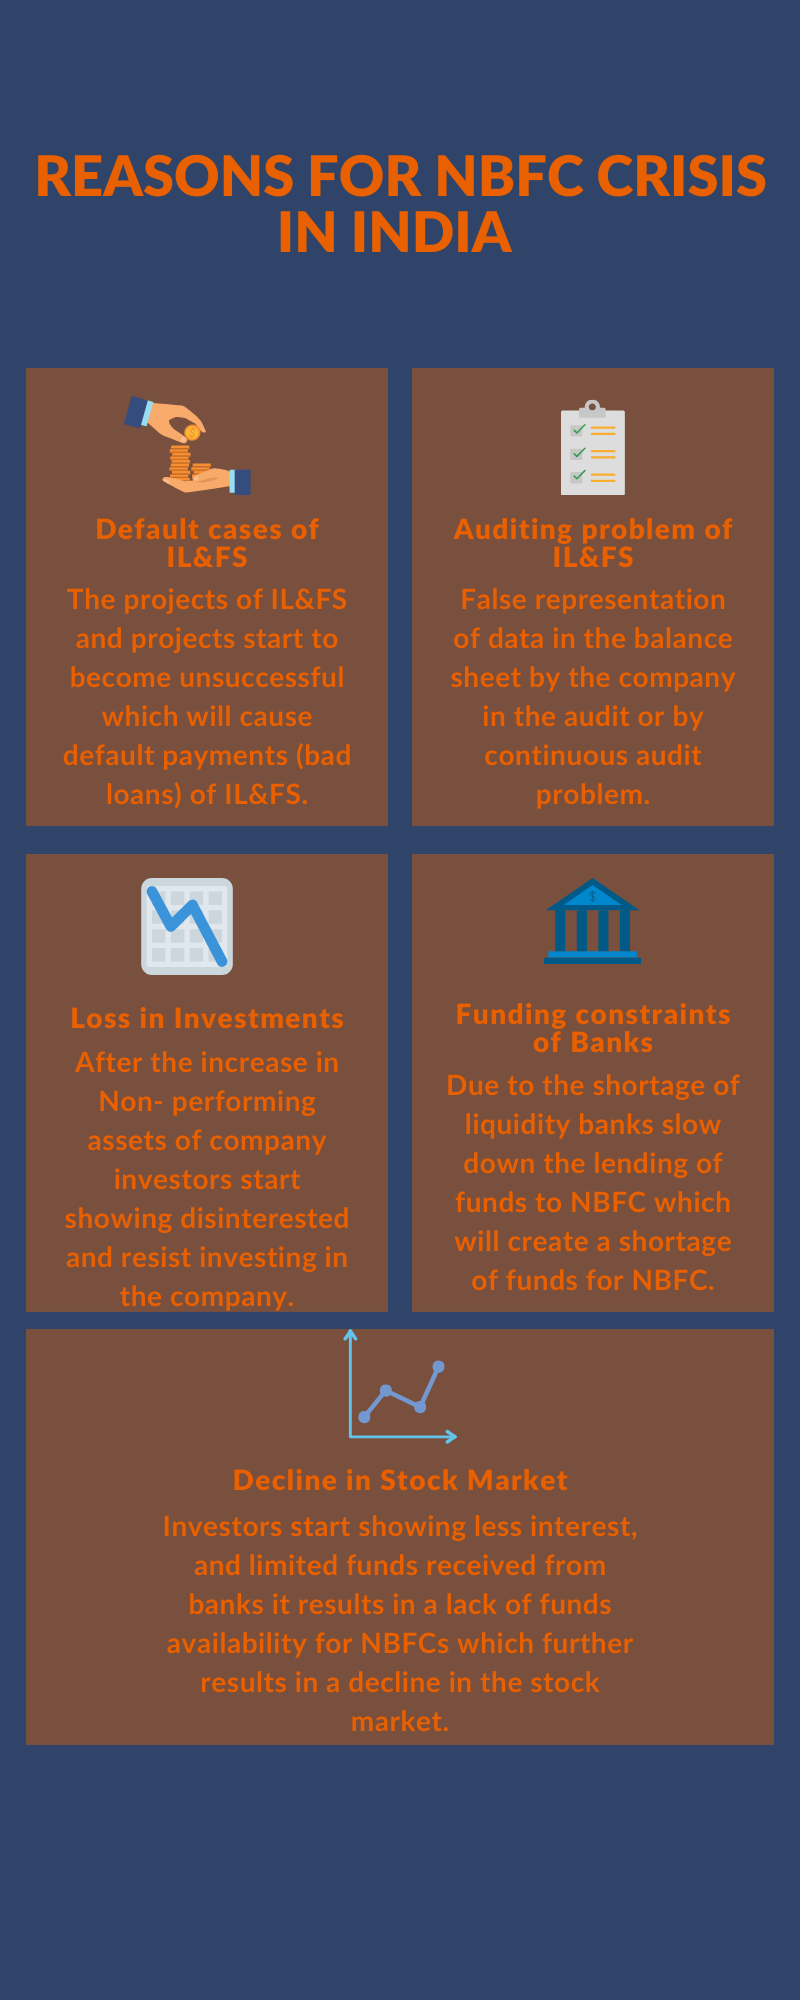 Reasons for NBFC Crisis in india infographic image